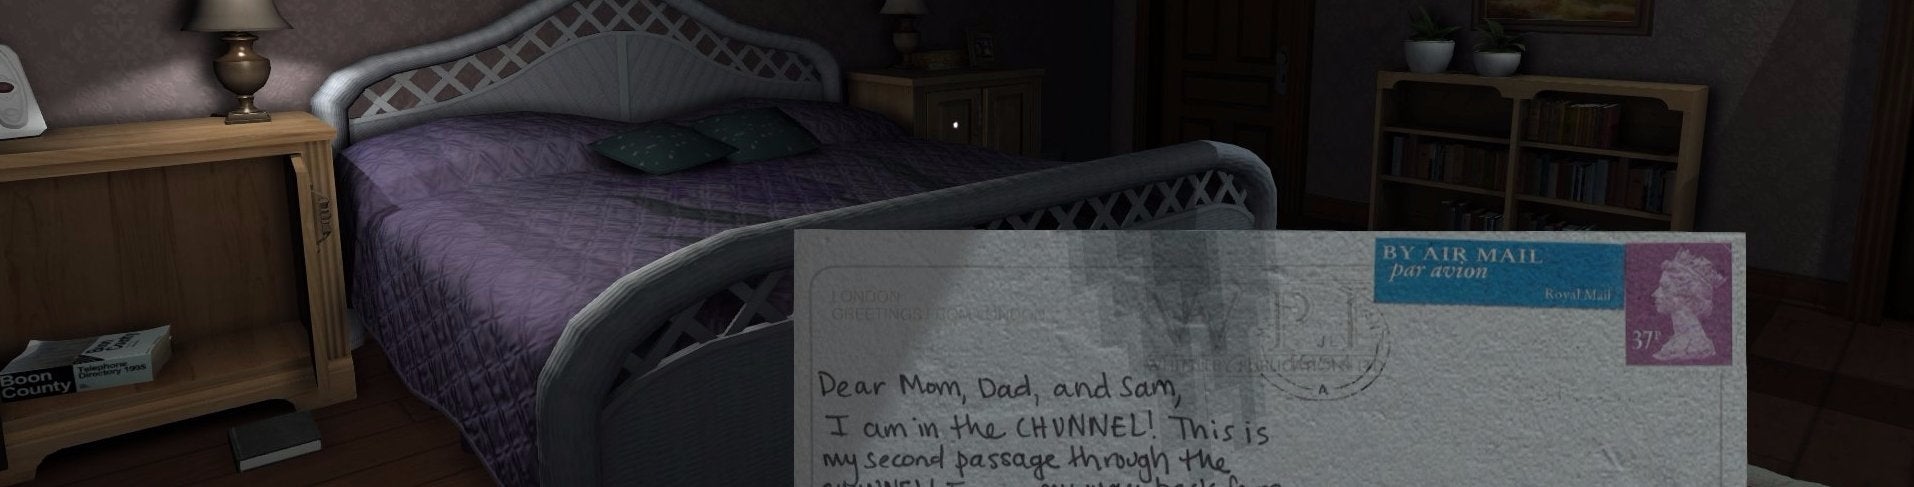 Image for Gone Home console review